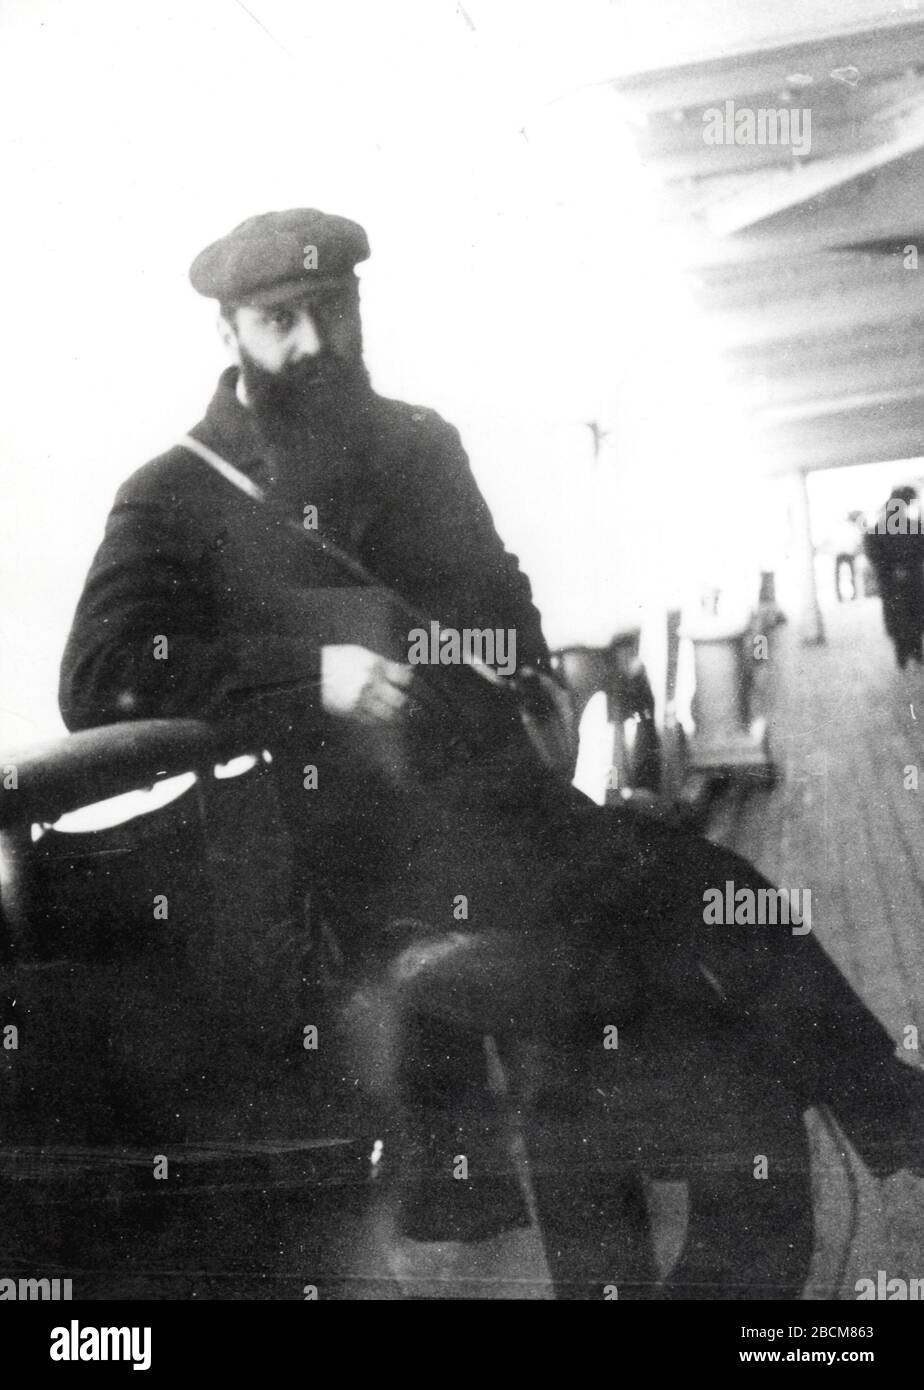 English Theodor Herzl Aboard A Ship En Route To Israel 18 E I I I I U U E I O I E I O I U O C E U C 18 1 January 18 This Is Available From National Photo Collection Of